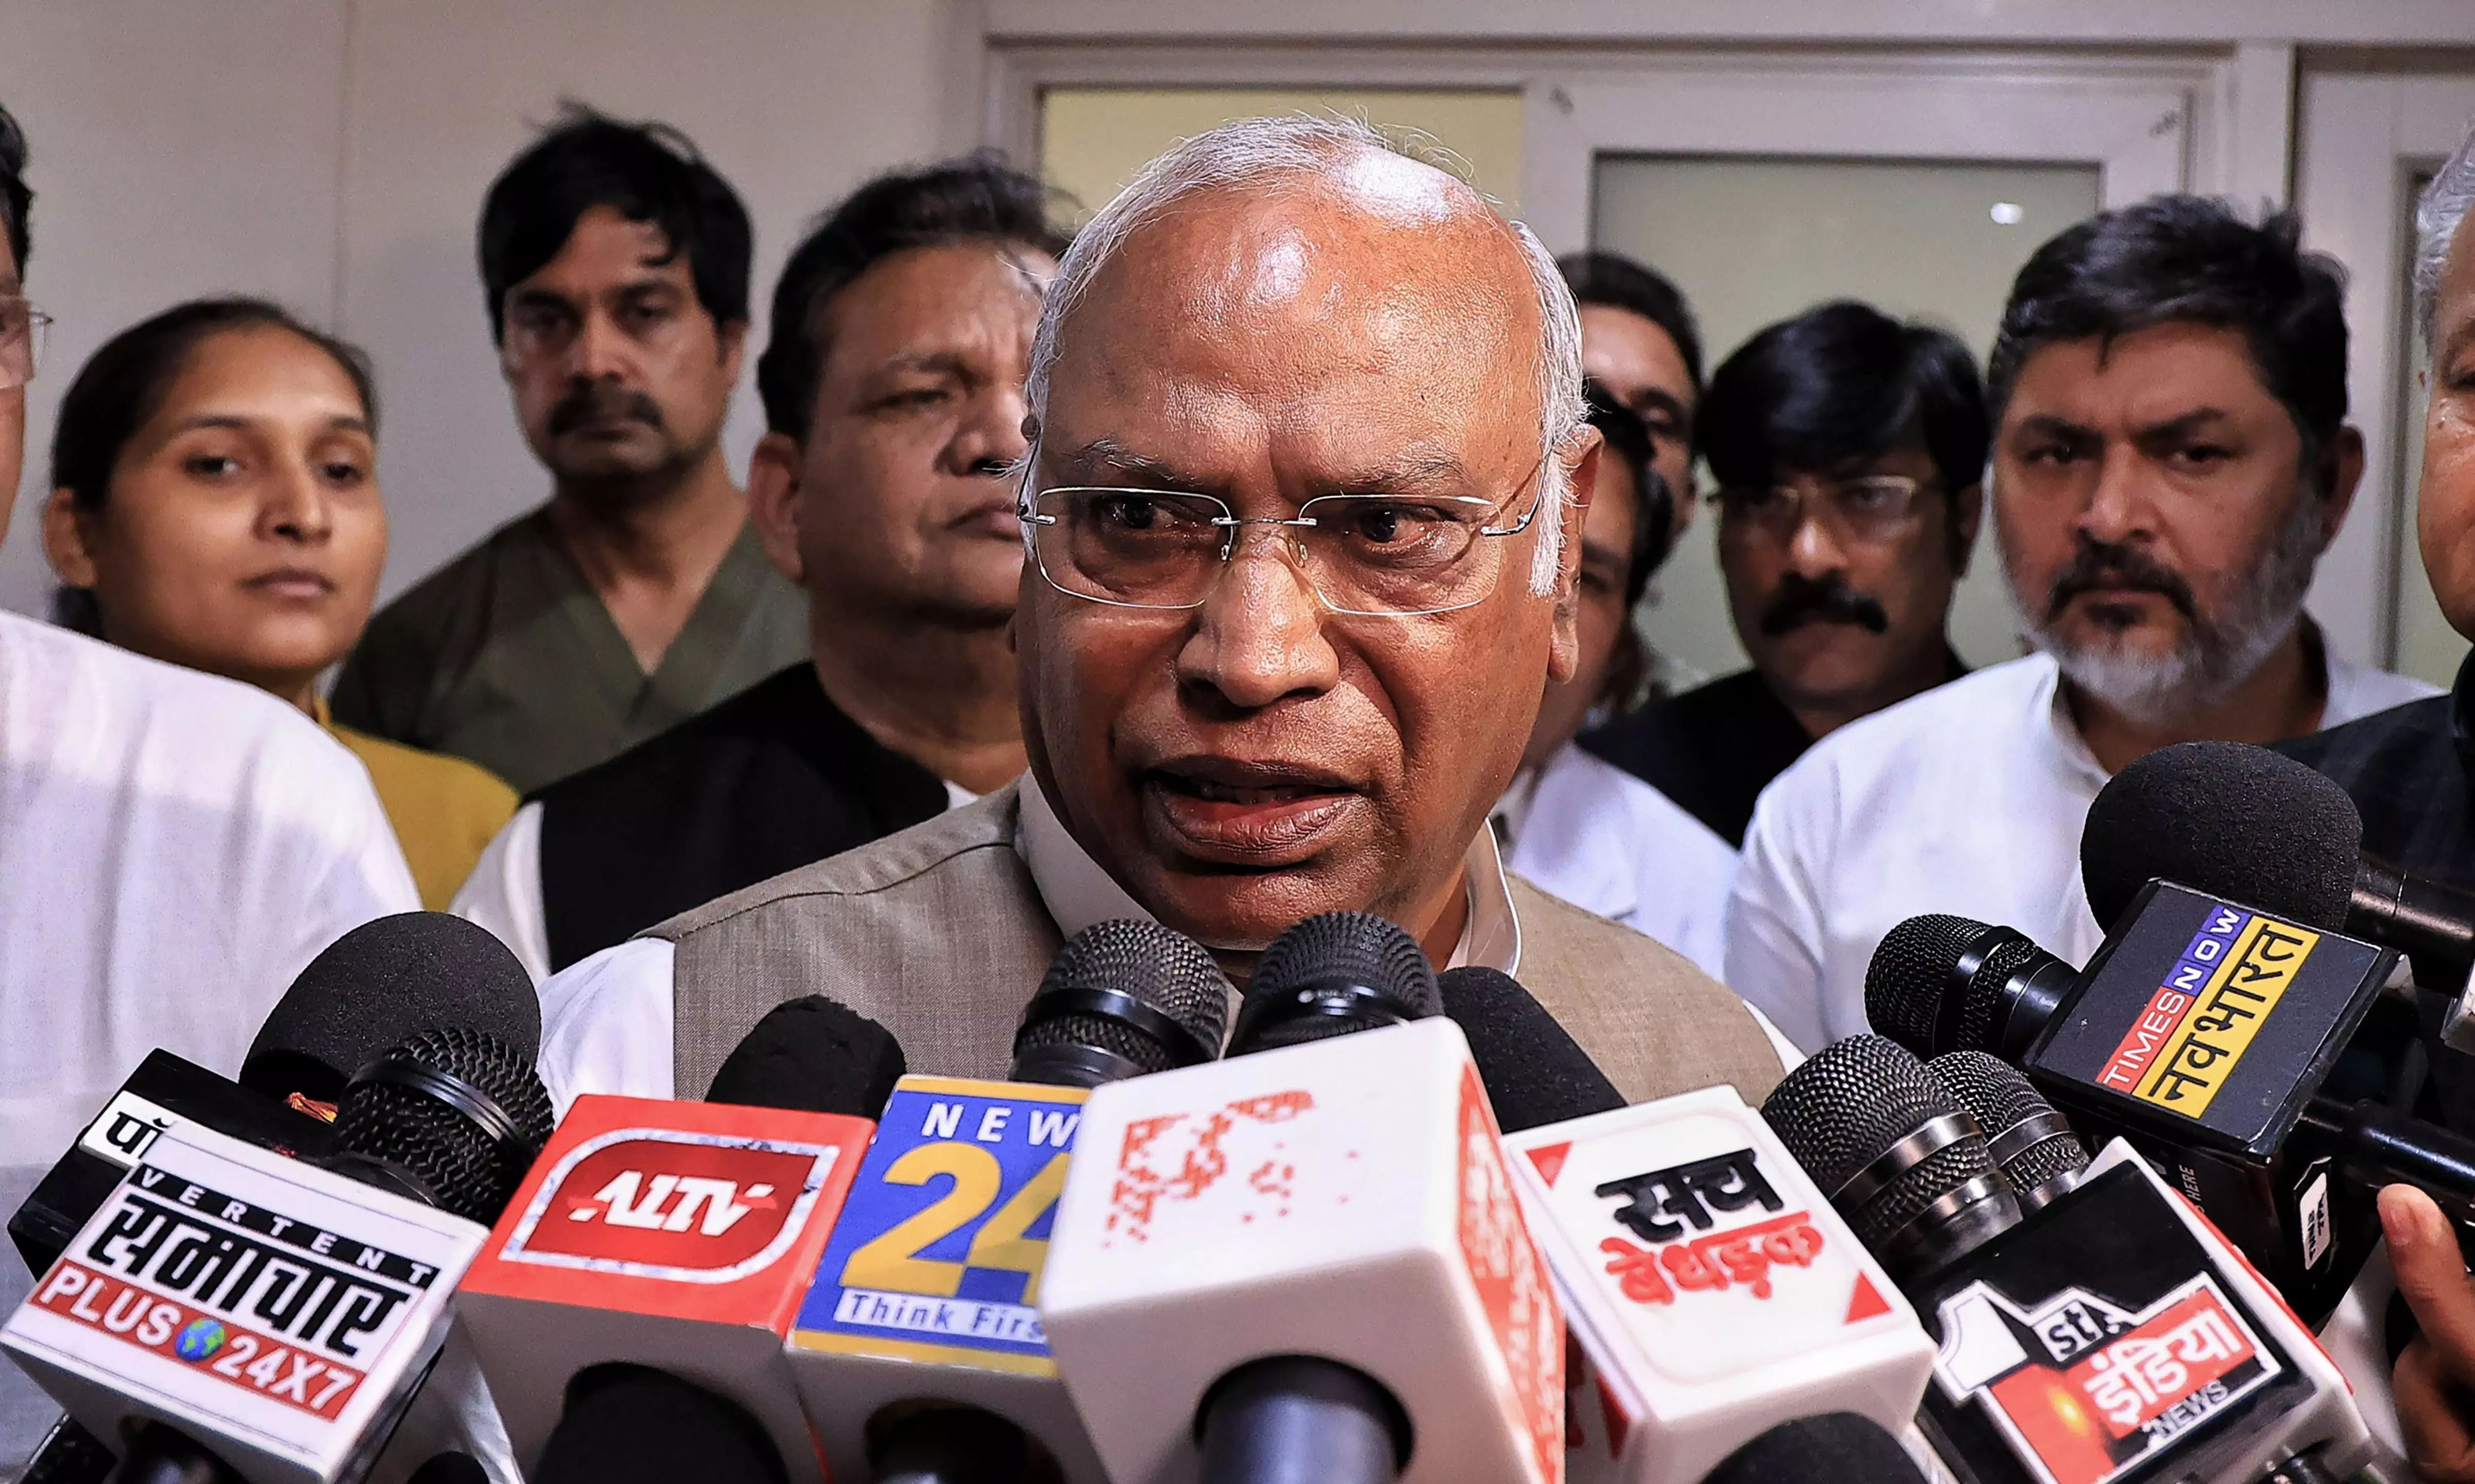 Modi can try as much as he wants, Congress will retain power in Rajasthan: Kharge